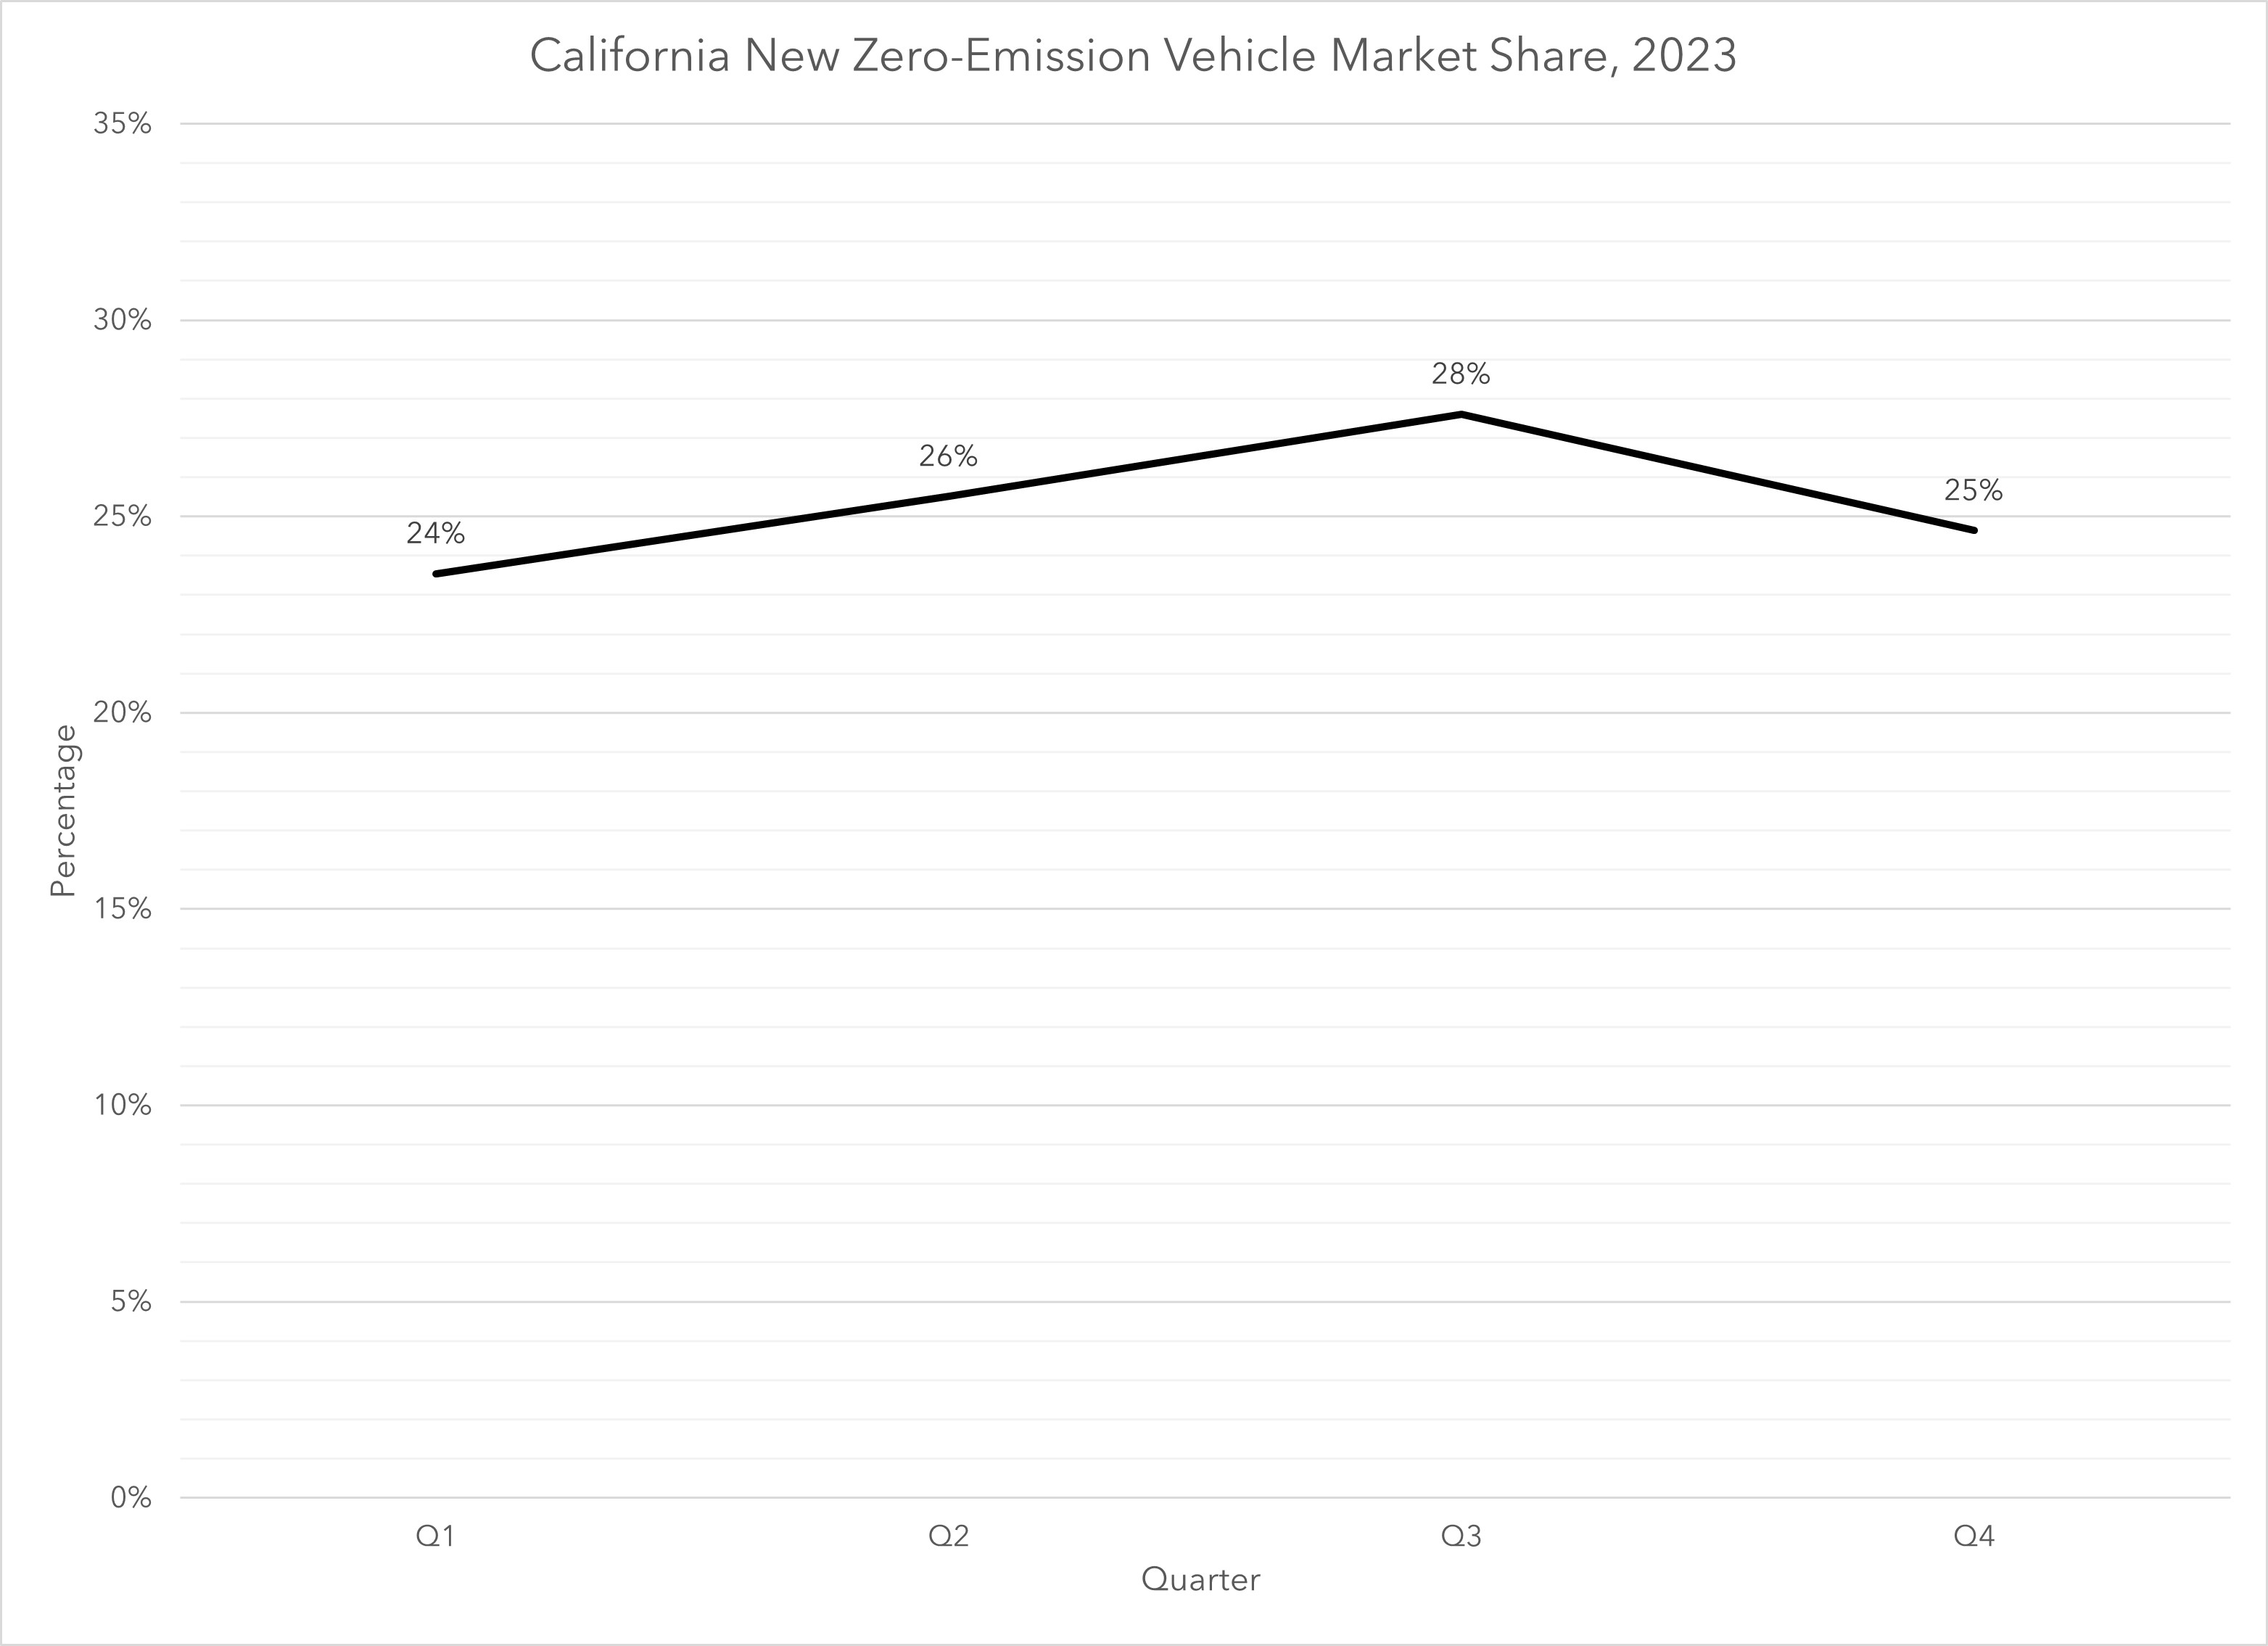 This visual displays California's zero-emission vehicle market share by quarter for 2023. The market share for quarters 1, 2, 3, and 4 is approximately 24 percent, 26 percent, 28 percent, and 25 percent, respectively.